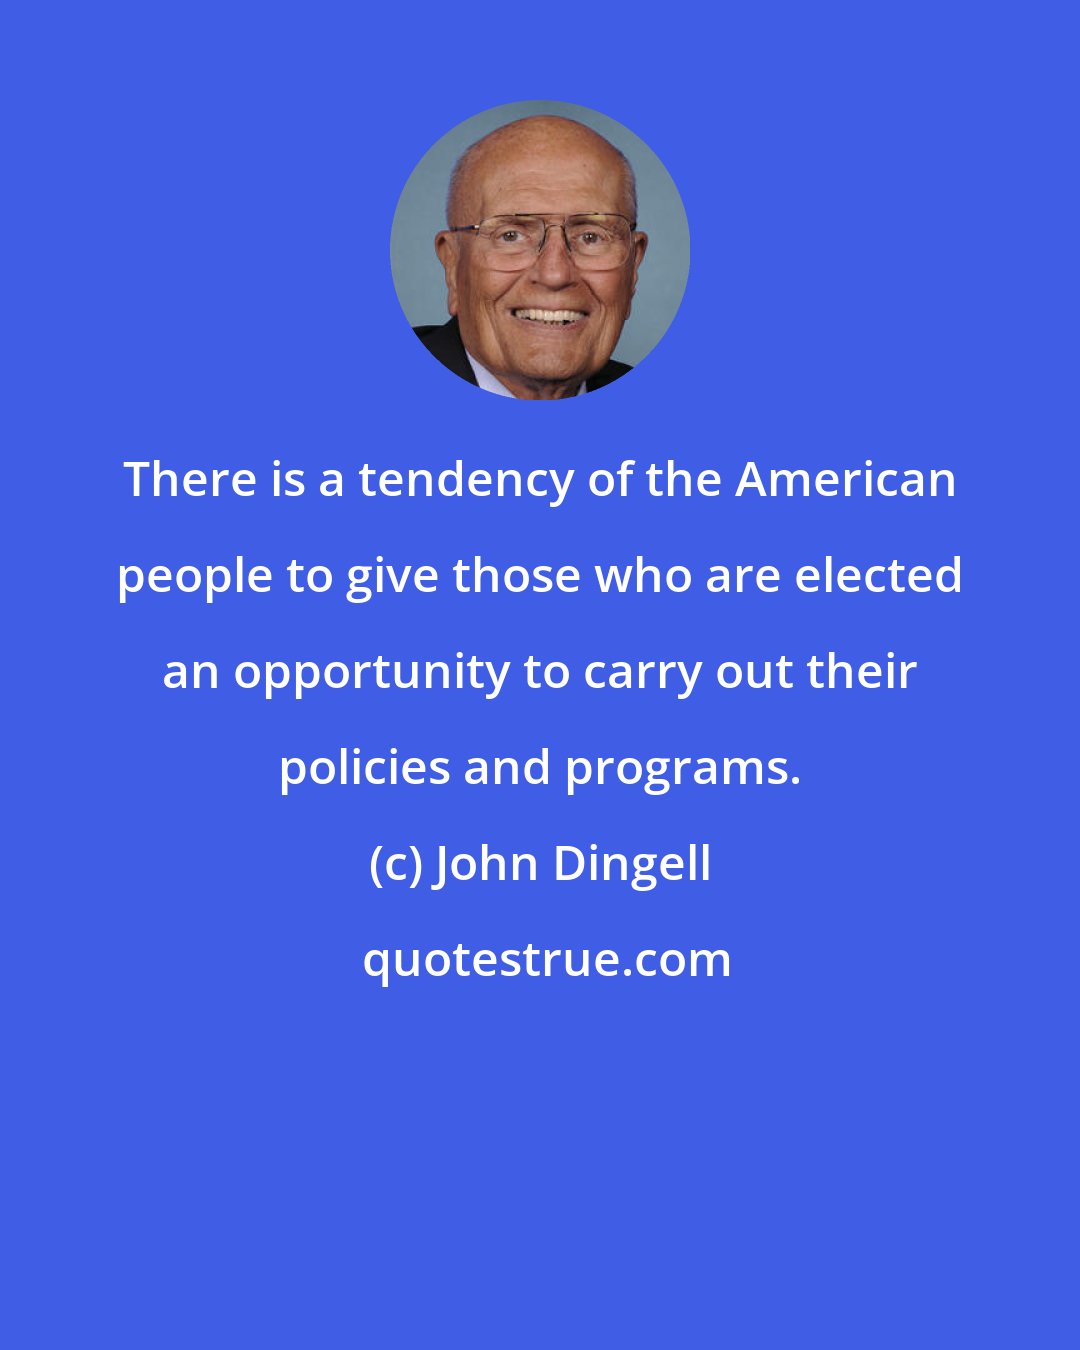 John Dingell: There is a tendency of the American people to give those who are elected an opportunity to carry out their policies and programs.